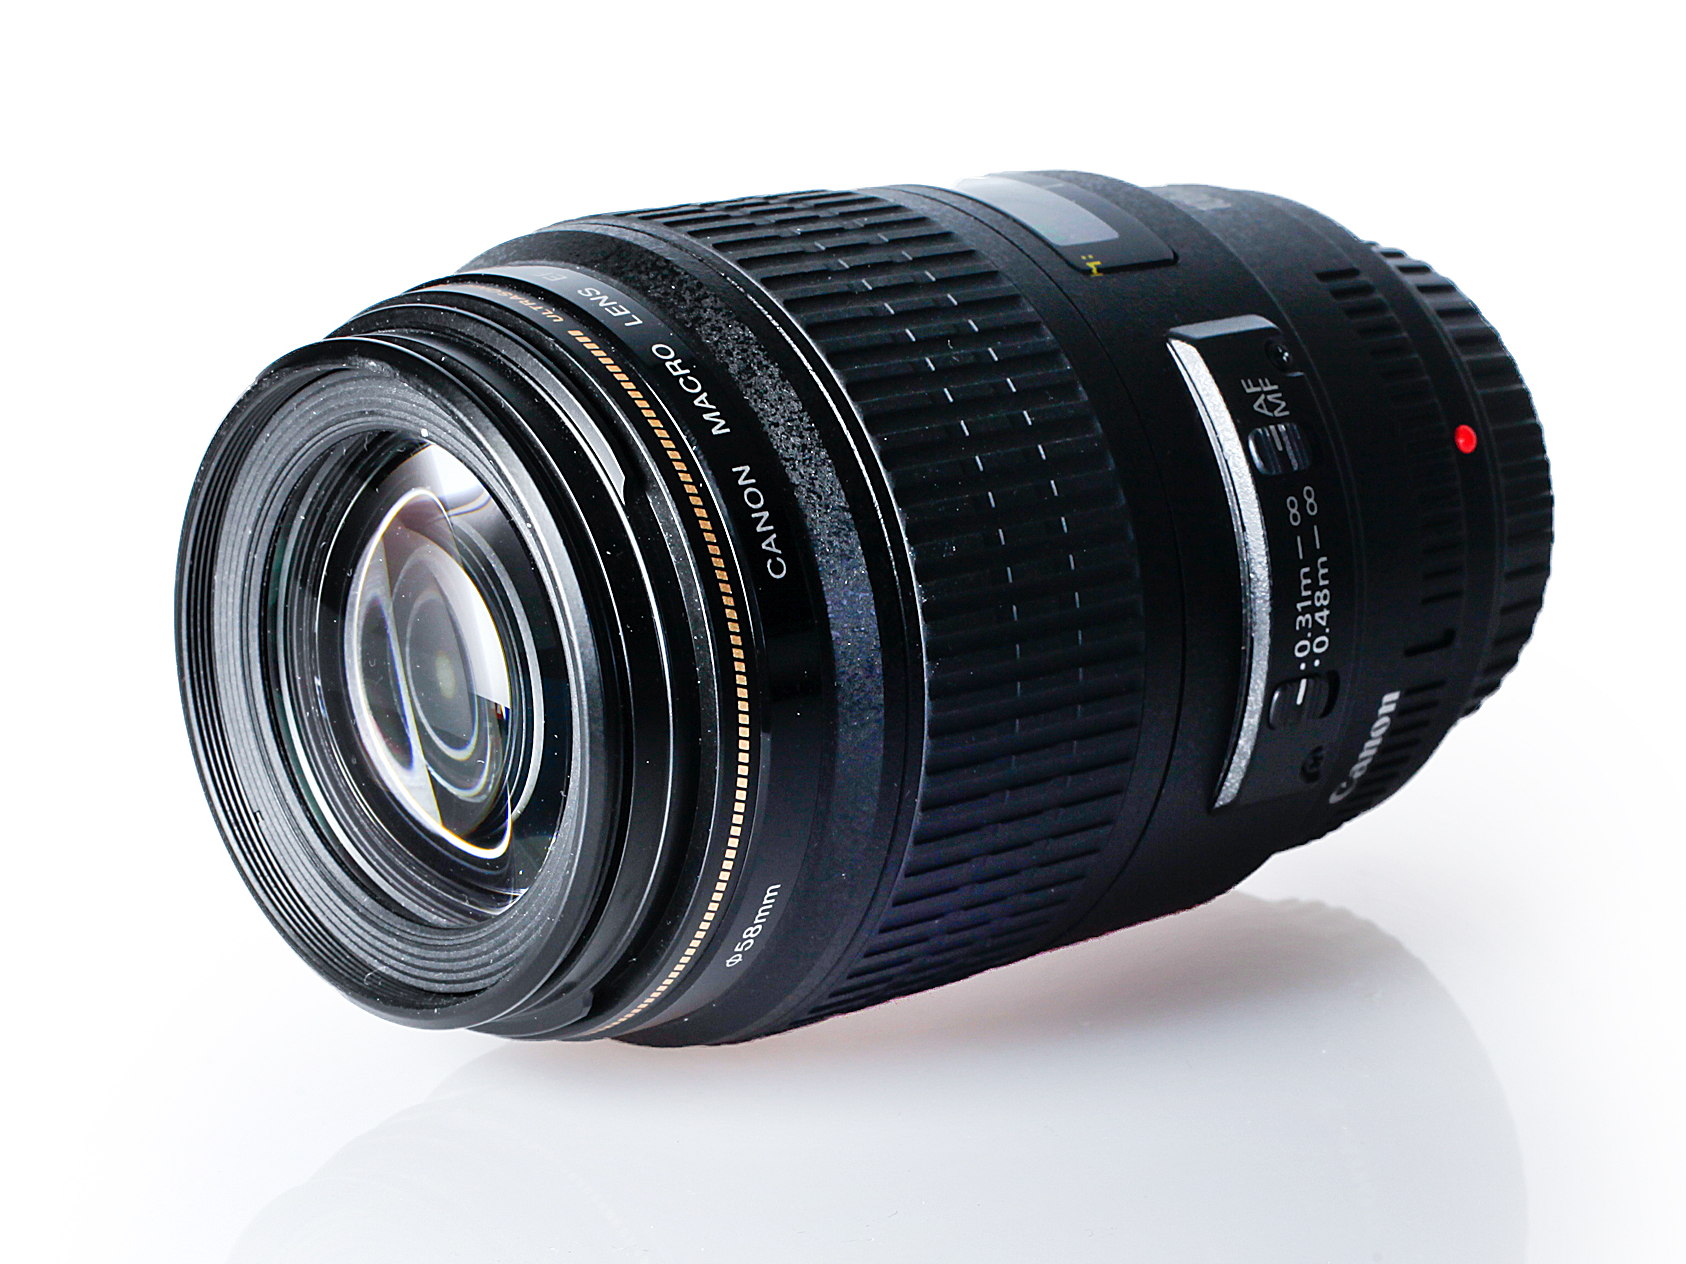 Canon macro 2.8 l is usm. Canon EF 100mm f/2 USM. Canon EF 100mm f/2.0 USM. Canon EF 100mm f/2.8 macro USM. Canon macro Lens 100mm 2.8 EF.